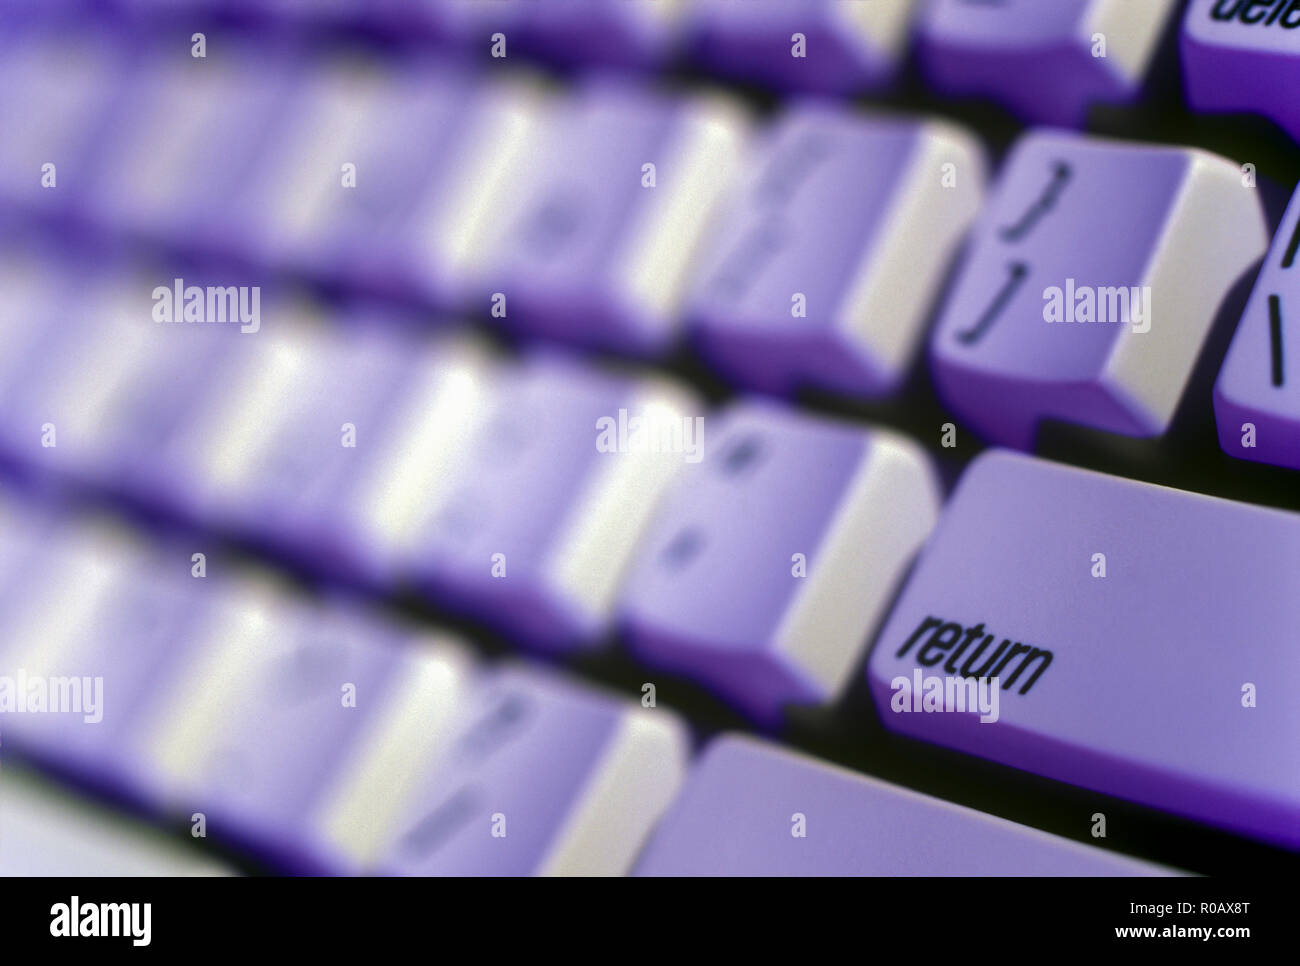 1998 HISTORICAL CLOSE UP SELECTIVE FOCUS OF COMPUTER KEYBOARD Stock Photo